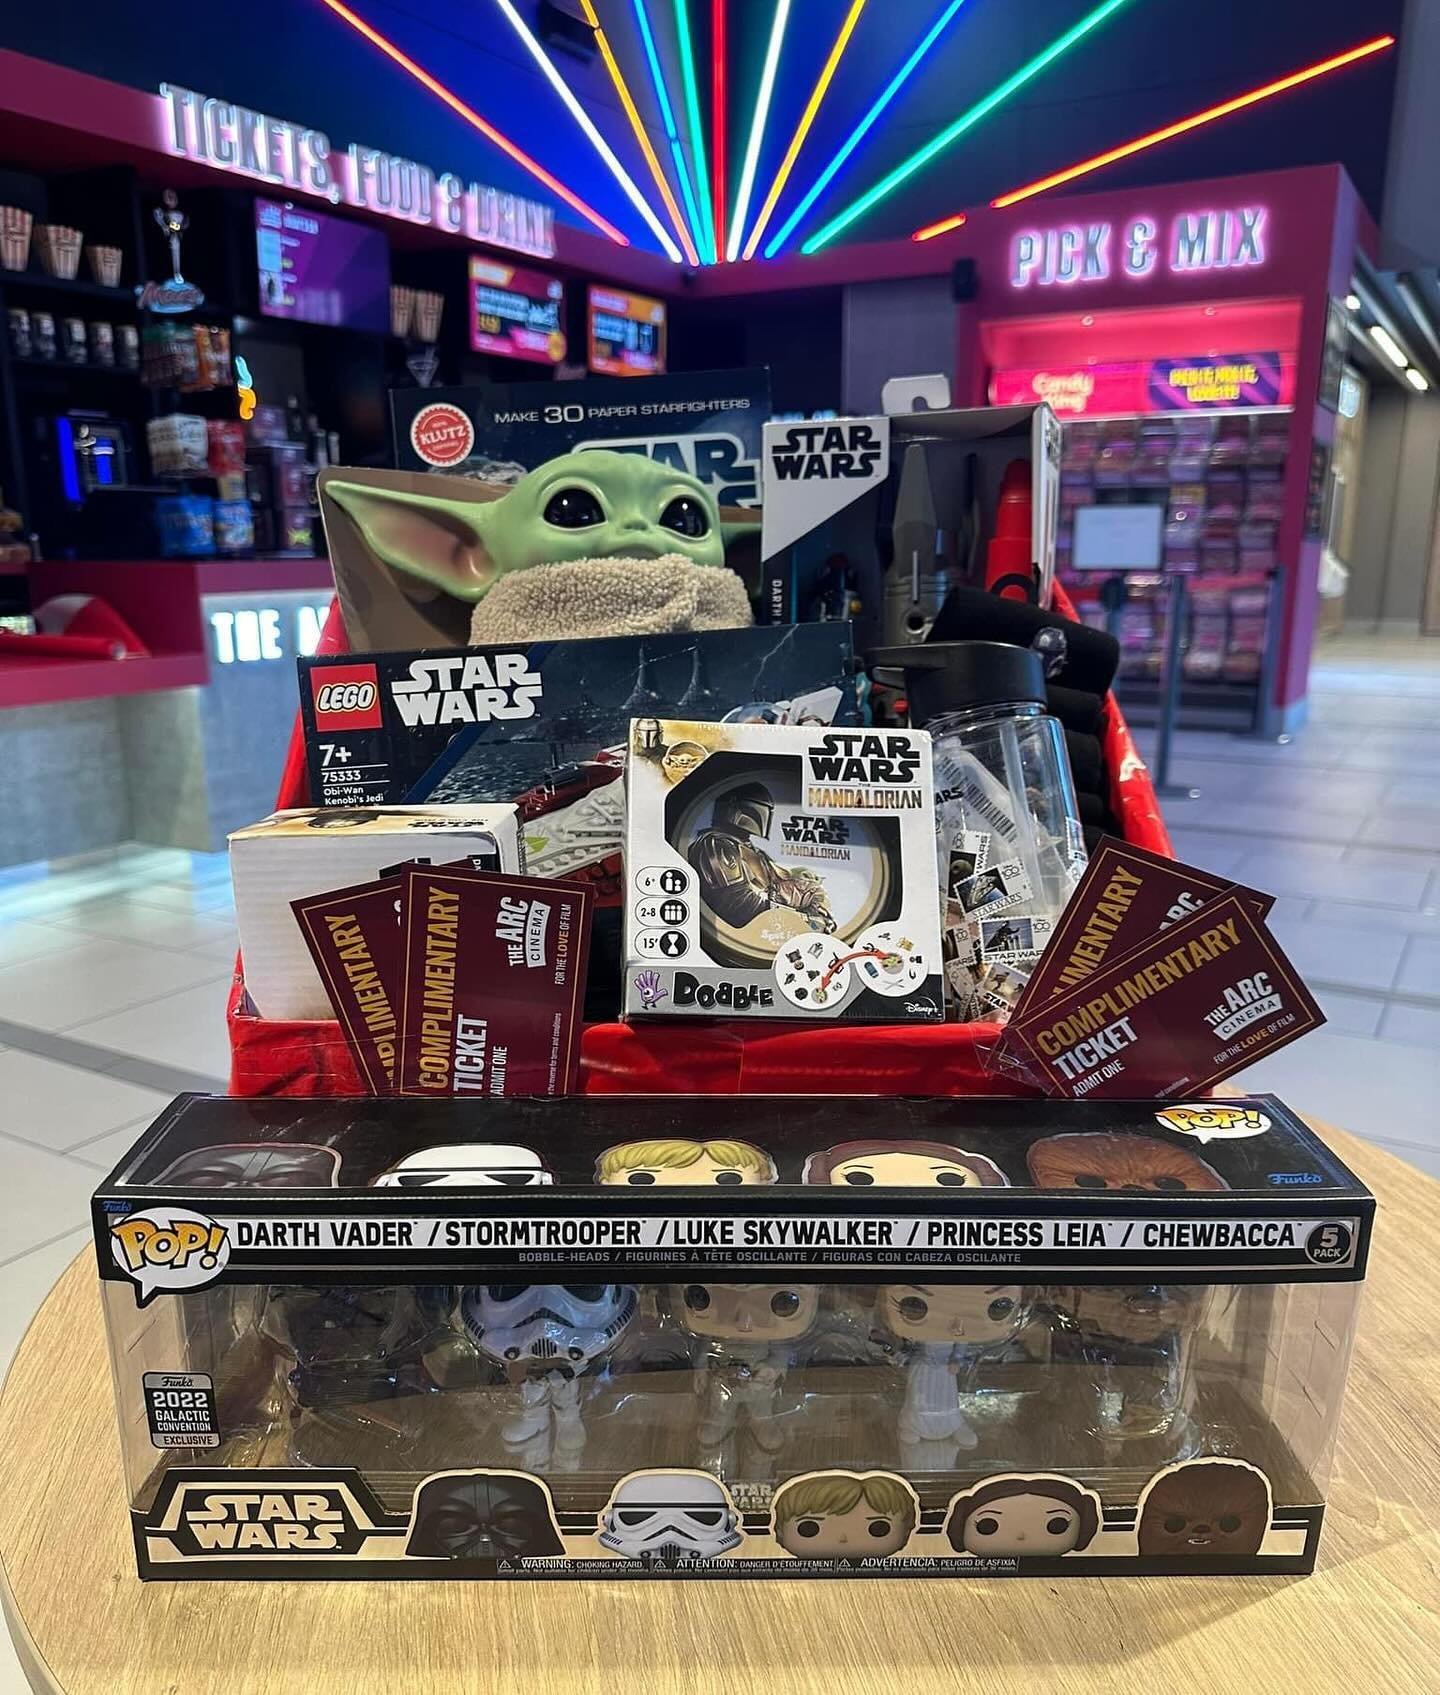 Today&rsquo;s the day! @arccinemadaventry will be showing Star Wars Episode 1 The Phantom Menace at 5pm, as a special charity showing for Jamie! 

We are doing some food for OurJays VIP guests at 4pm and there are 2 raffles (including some amazing St